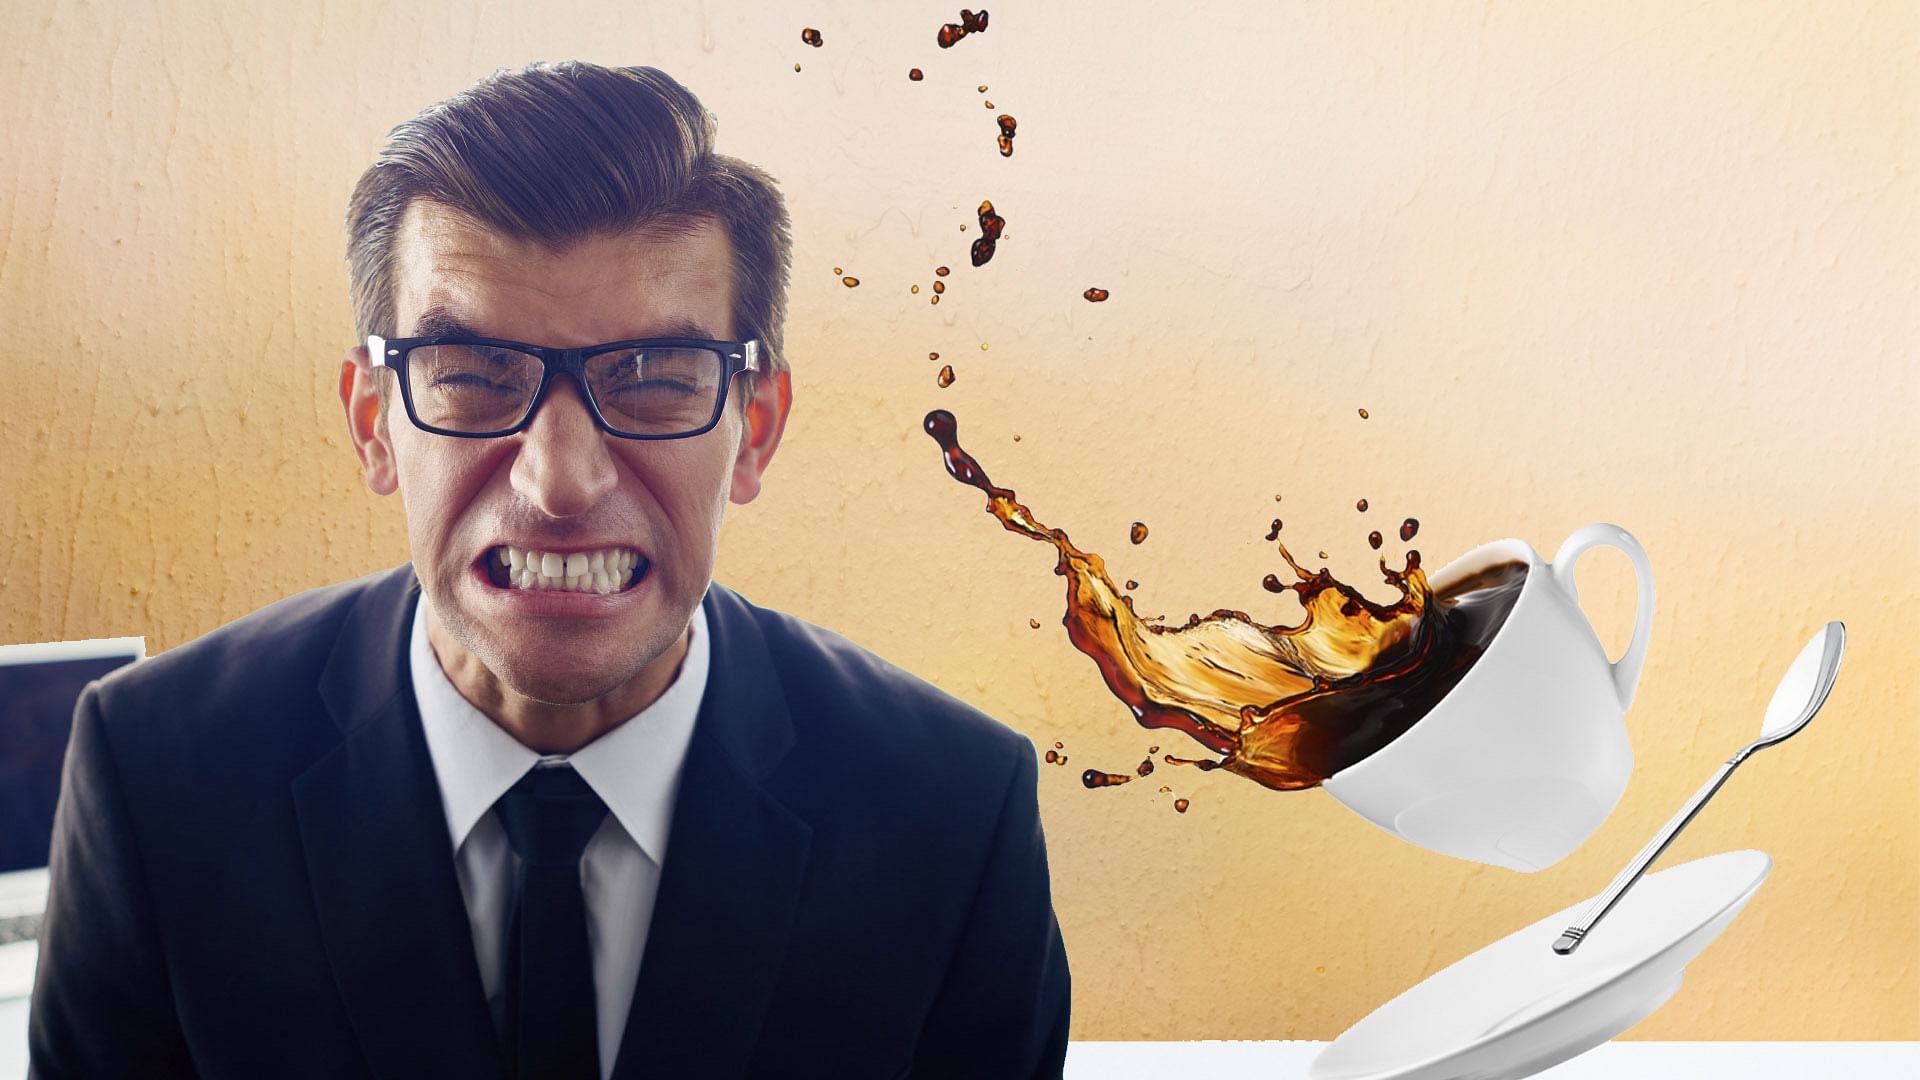 Do you know that the headache you have is because of too little or too much coffee? (Photo: iStock, Altered by <i>The Quint</i>)